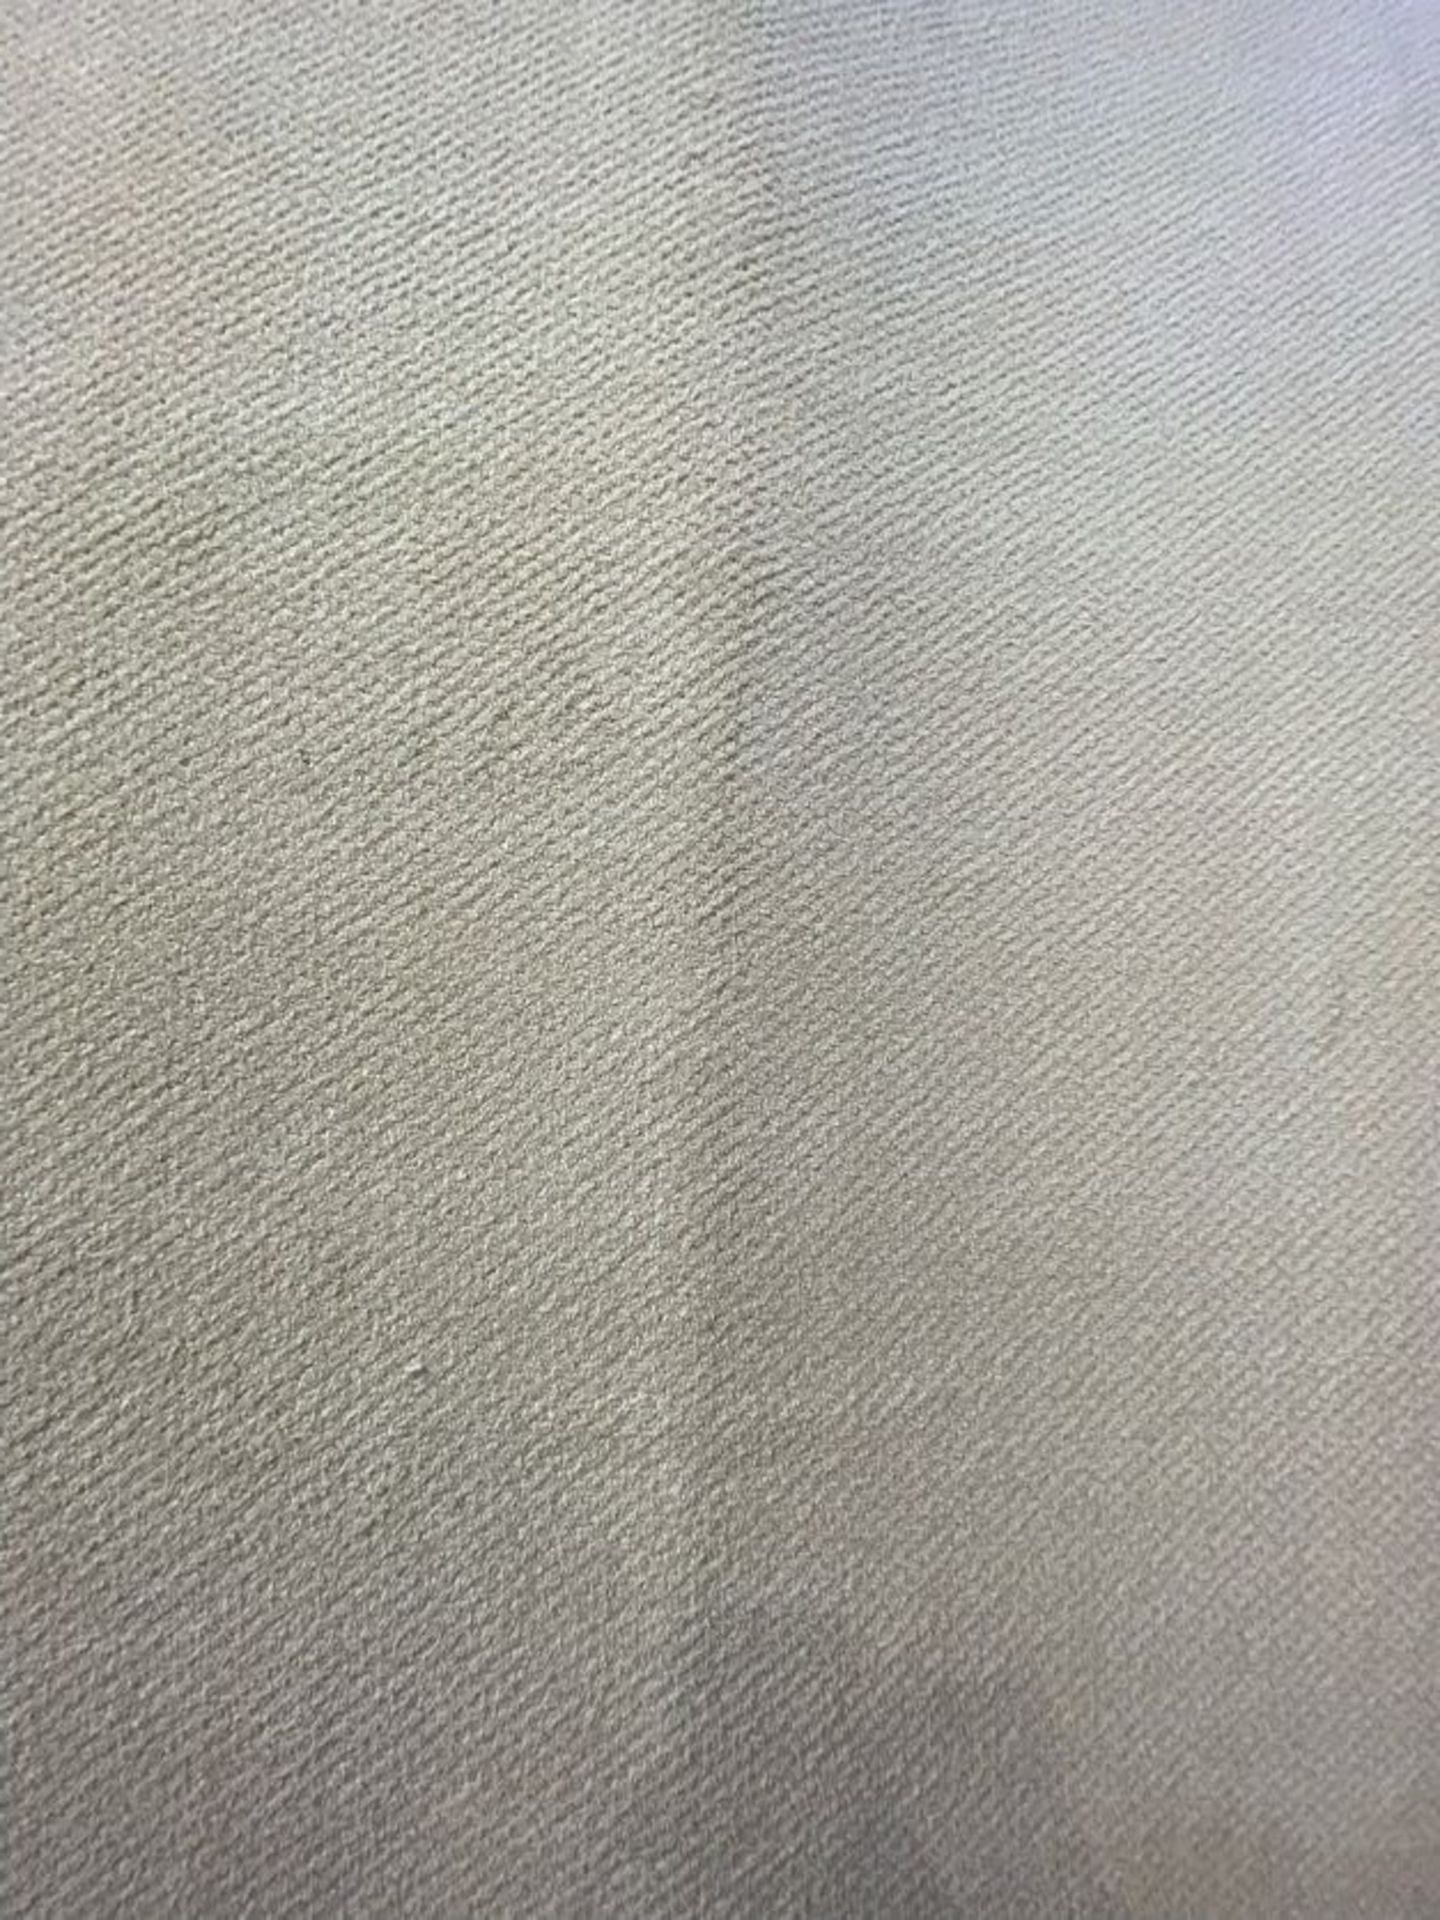 APPROX. 8' X 10'9" CARPET - Image 2 of 2